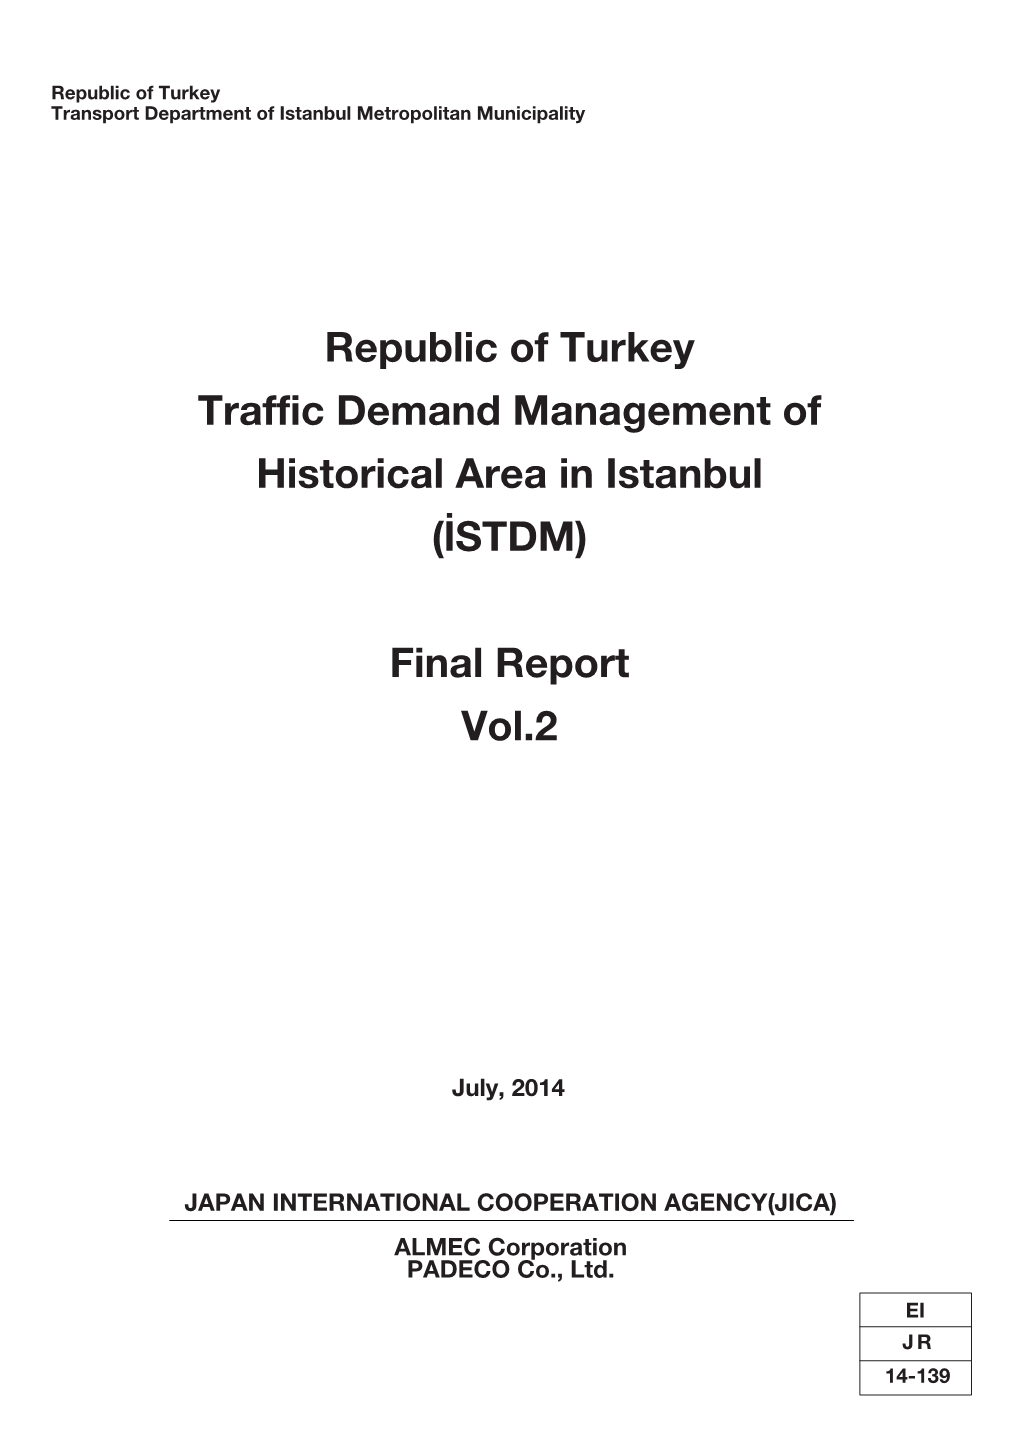 Republic of Turkey Traffic Demand Management of Historical Area in Istanbul (İSTDM)